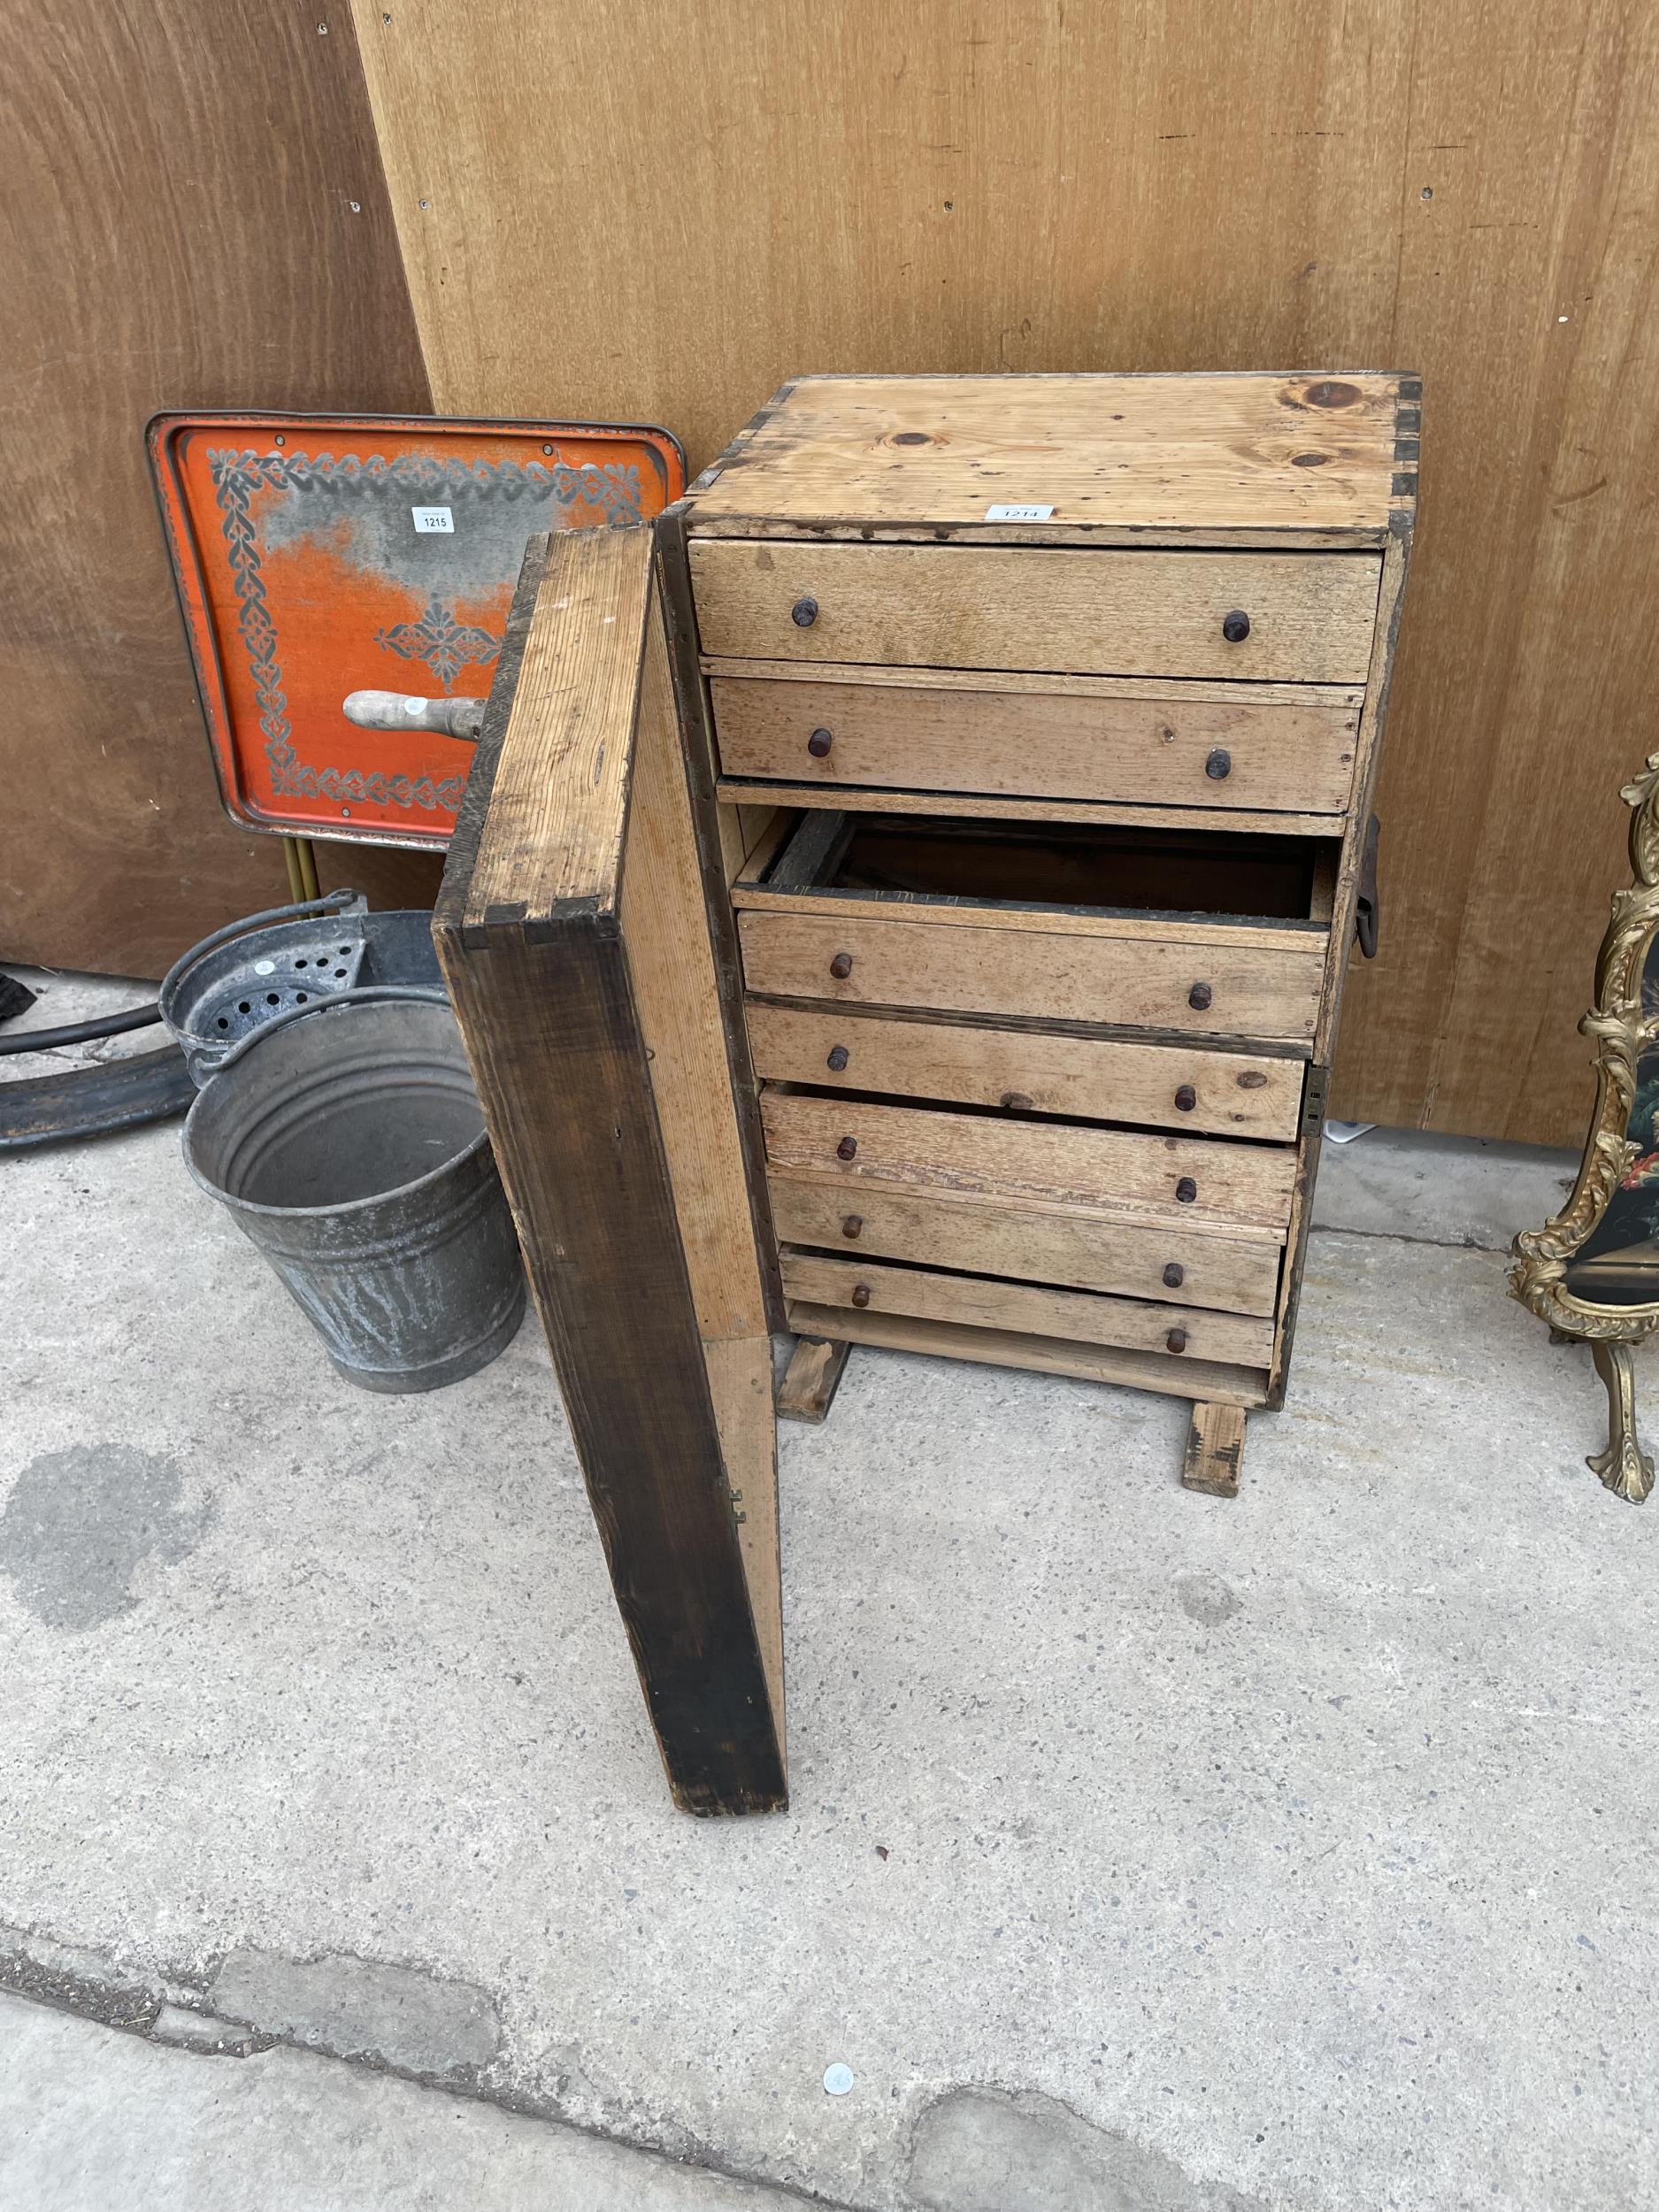 A VICTORIAN PINE LARGE VINTAGE JOINER'S CHEST WITH VARIOUS TOOLS SUCH AS G-CLAMP , VINTAGE SPIRIT